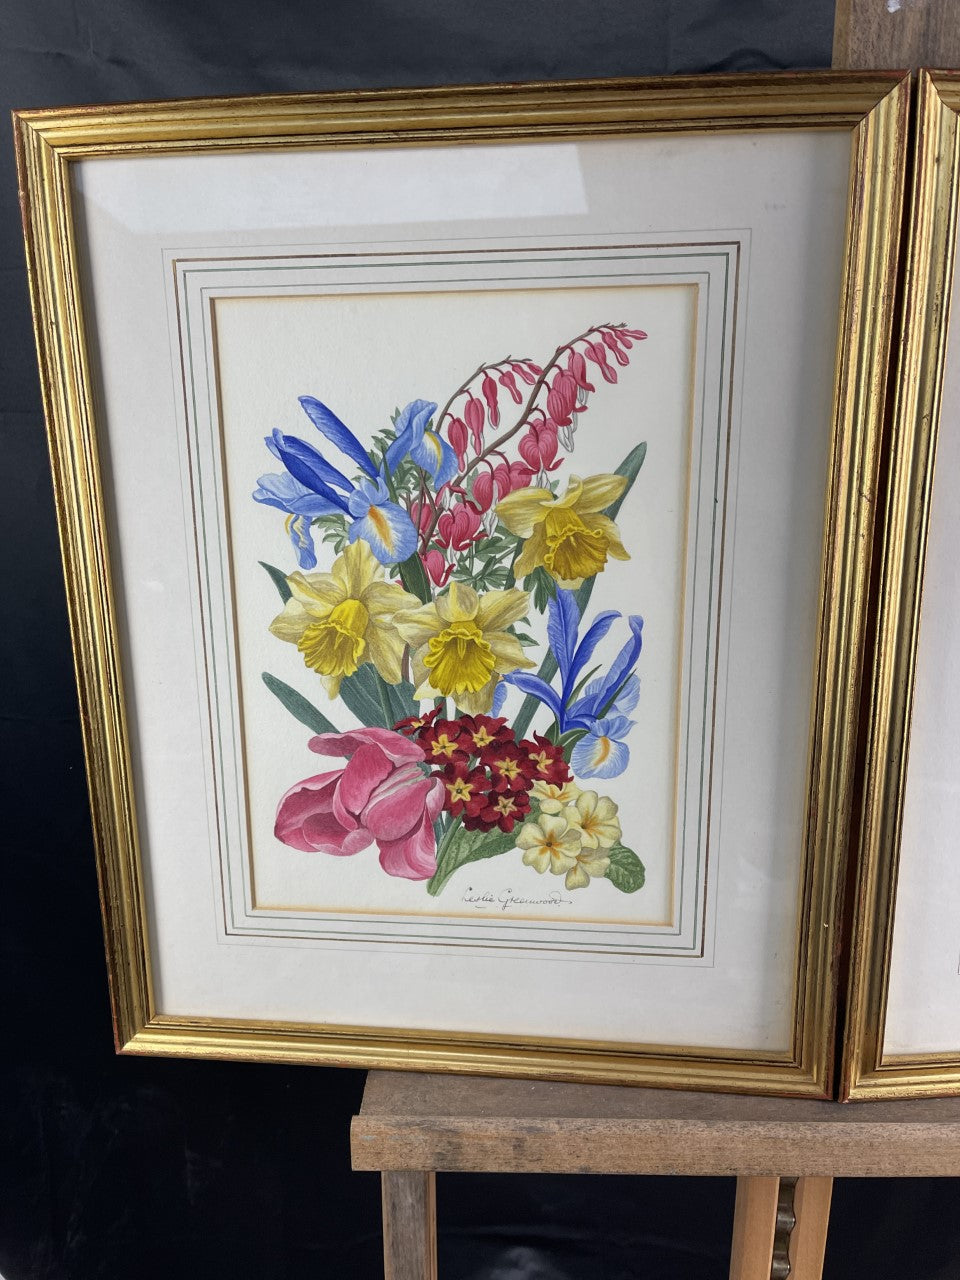 Leslie Greenwood (1907-1987): Collection of 4 Original Botanical Watercolours